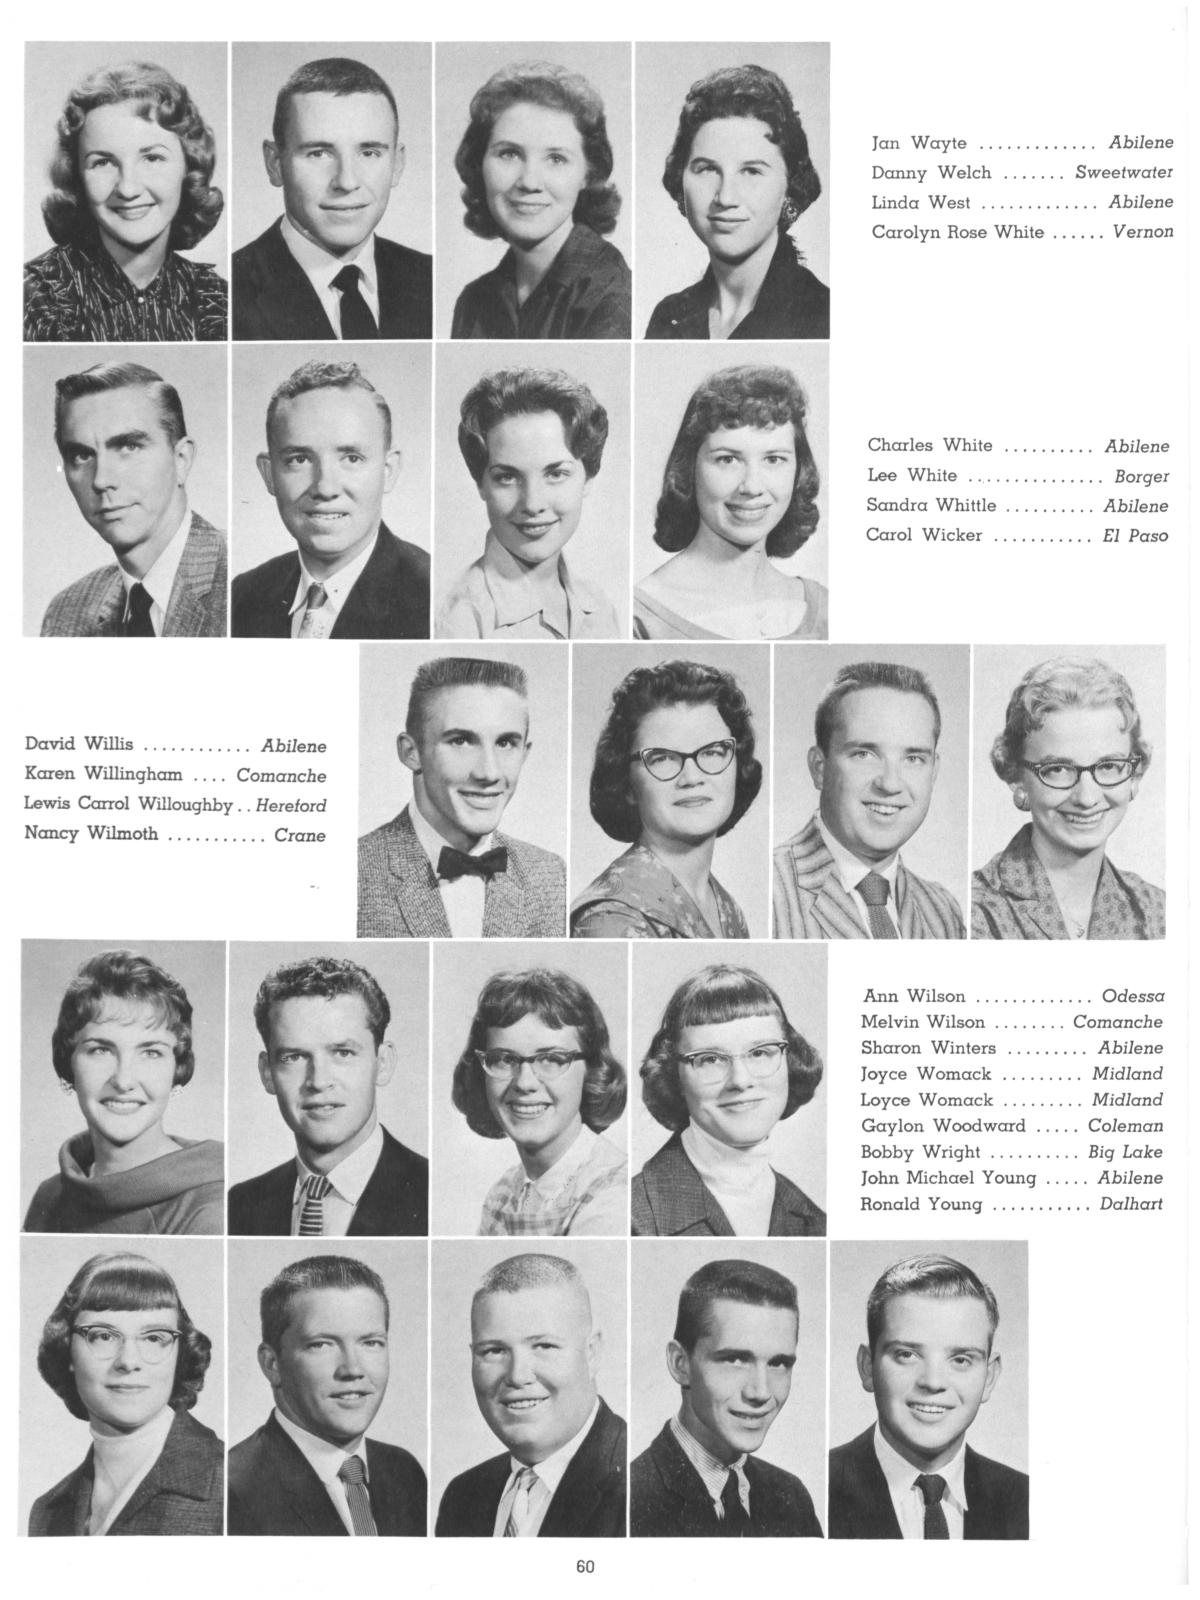 The Totem, Yearbook of McMurry College, 1959
                                                
                                                    60
                                                